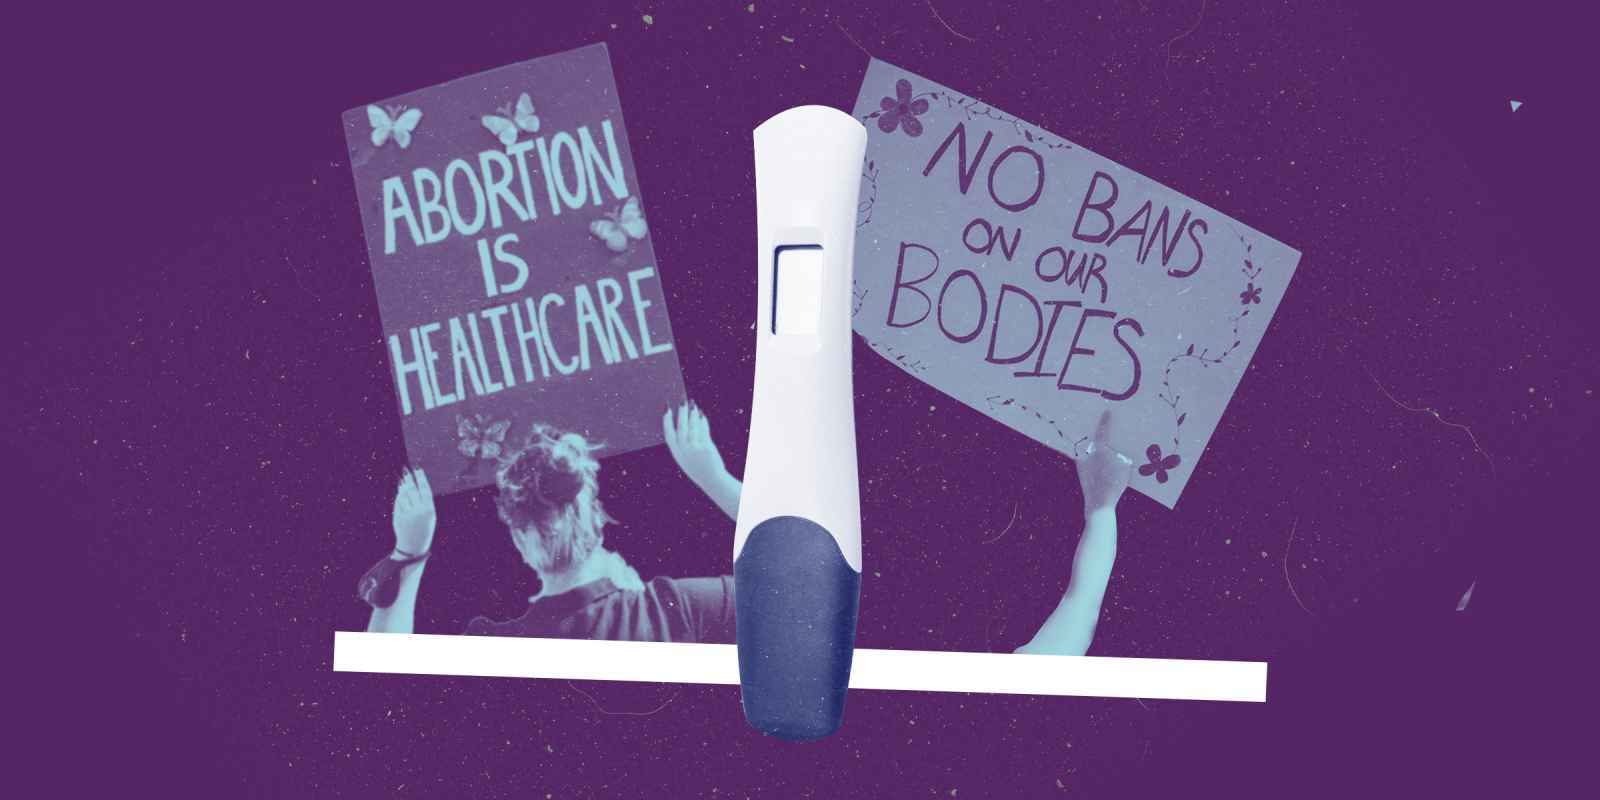 Two pro-abortion protest signs and a pregnancy test